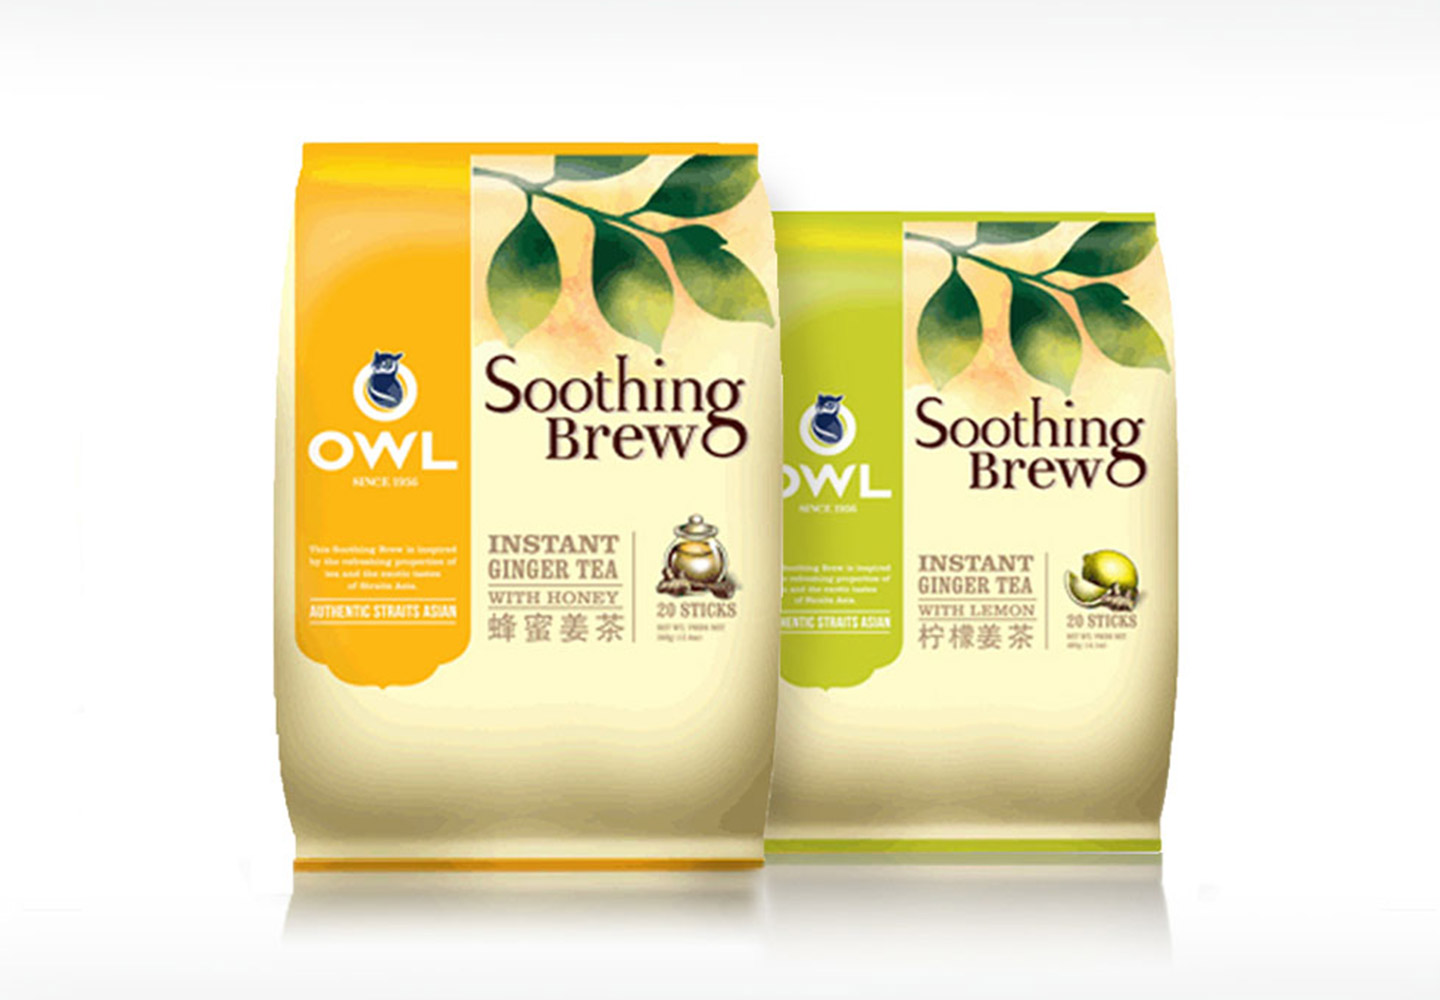 Brand Consultancy in FMCG Industry. Packaging design for OWL.